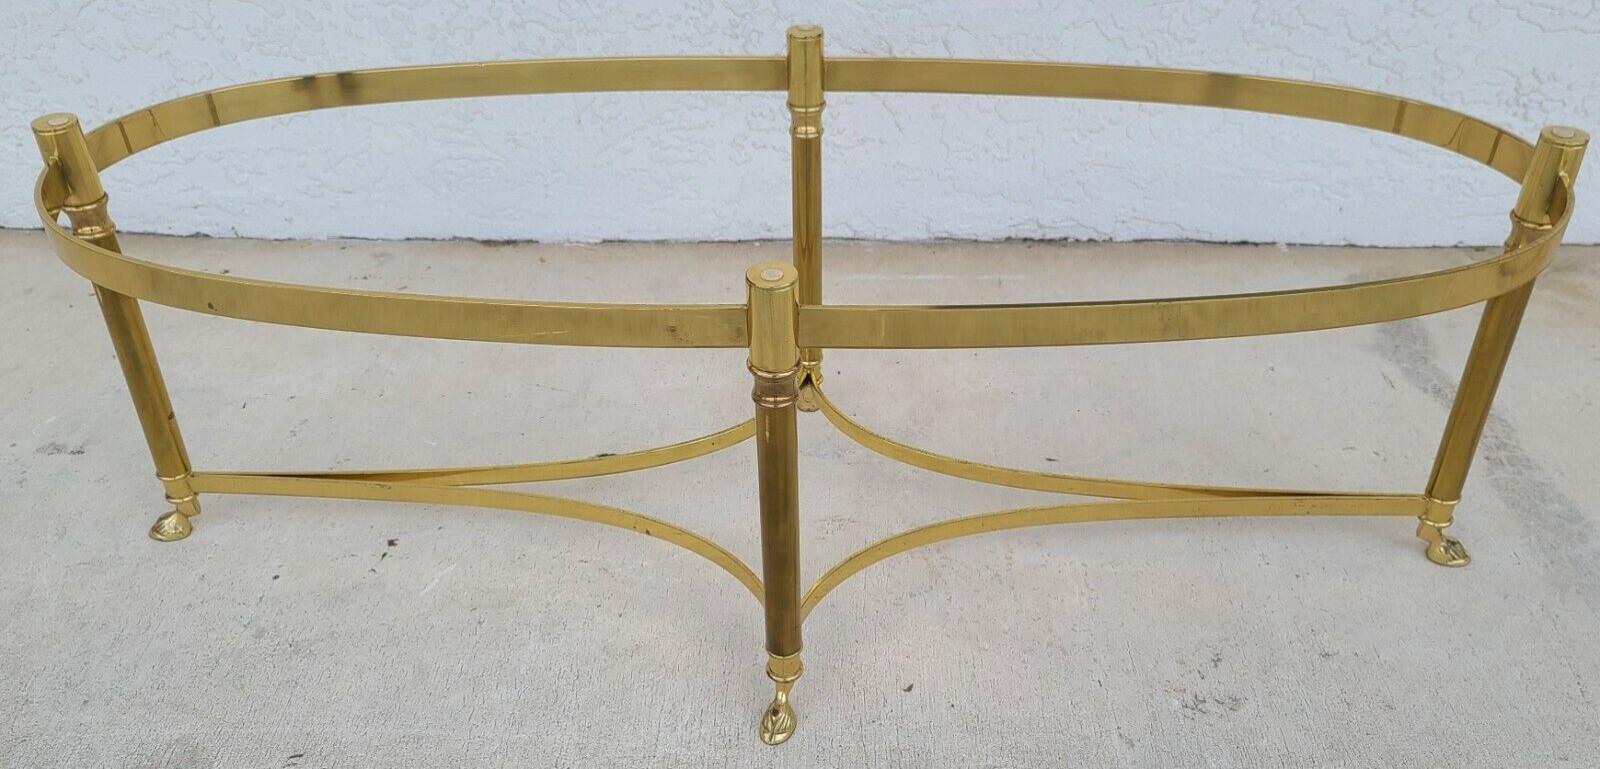 Fin du 20e siècle LaBarge Brass Hoof Footed Cocktail Coffee Table  en vente